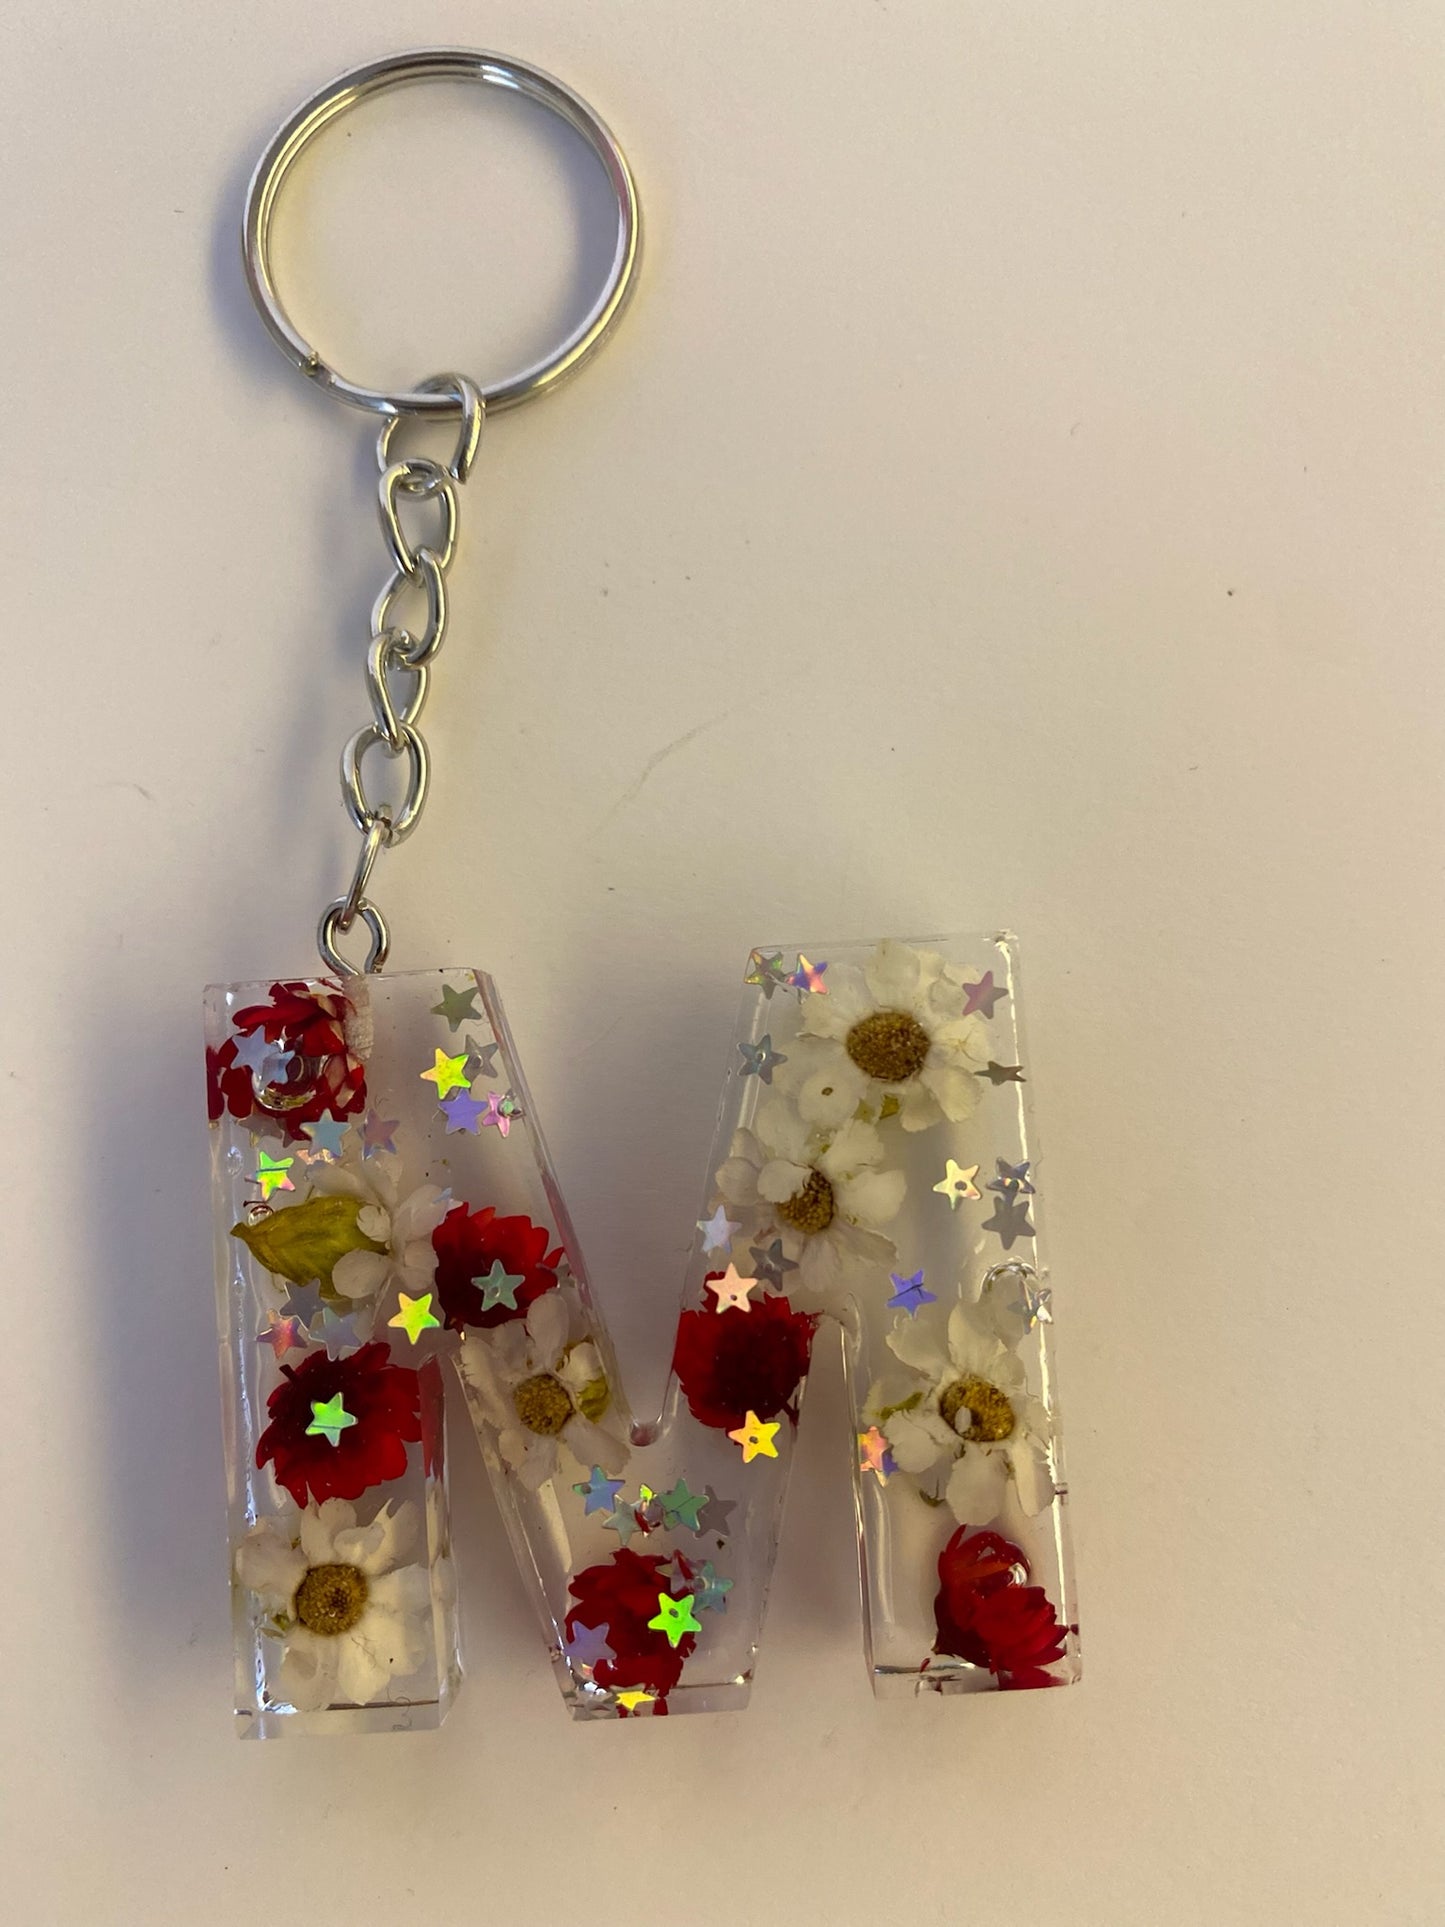 Letter keychains